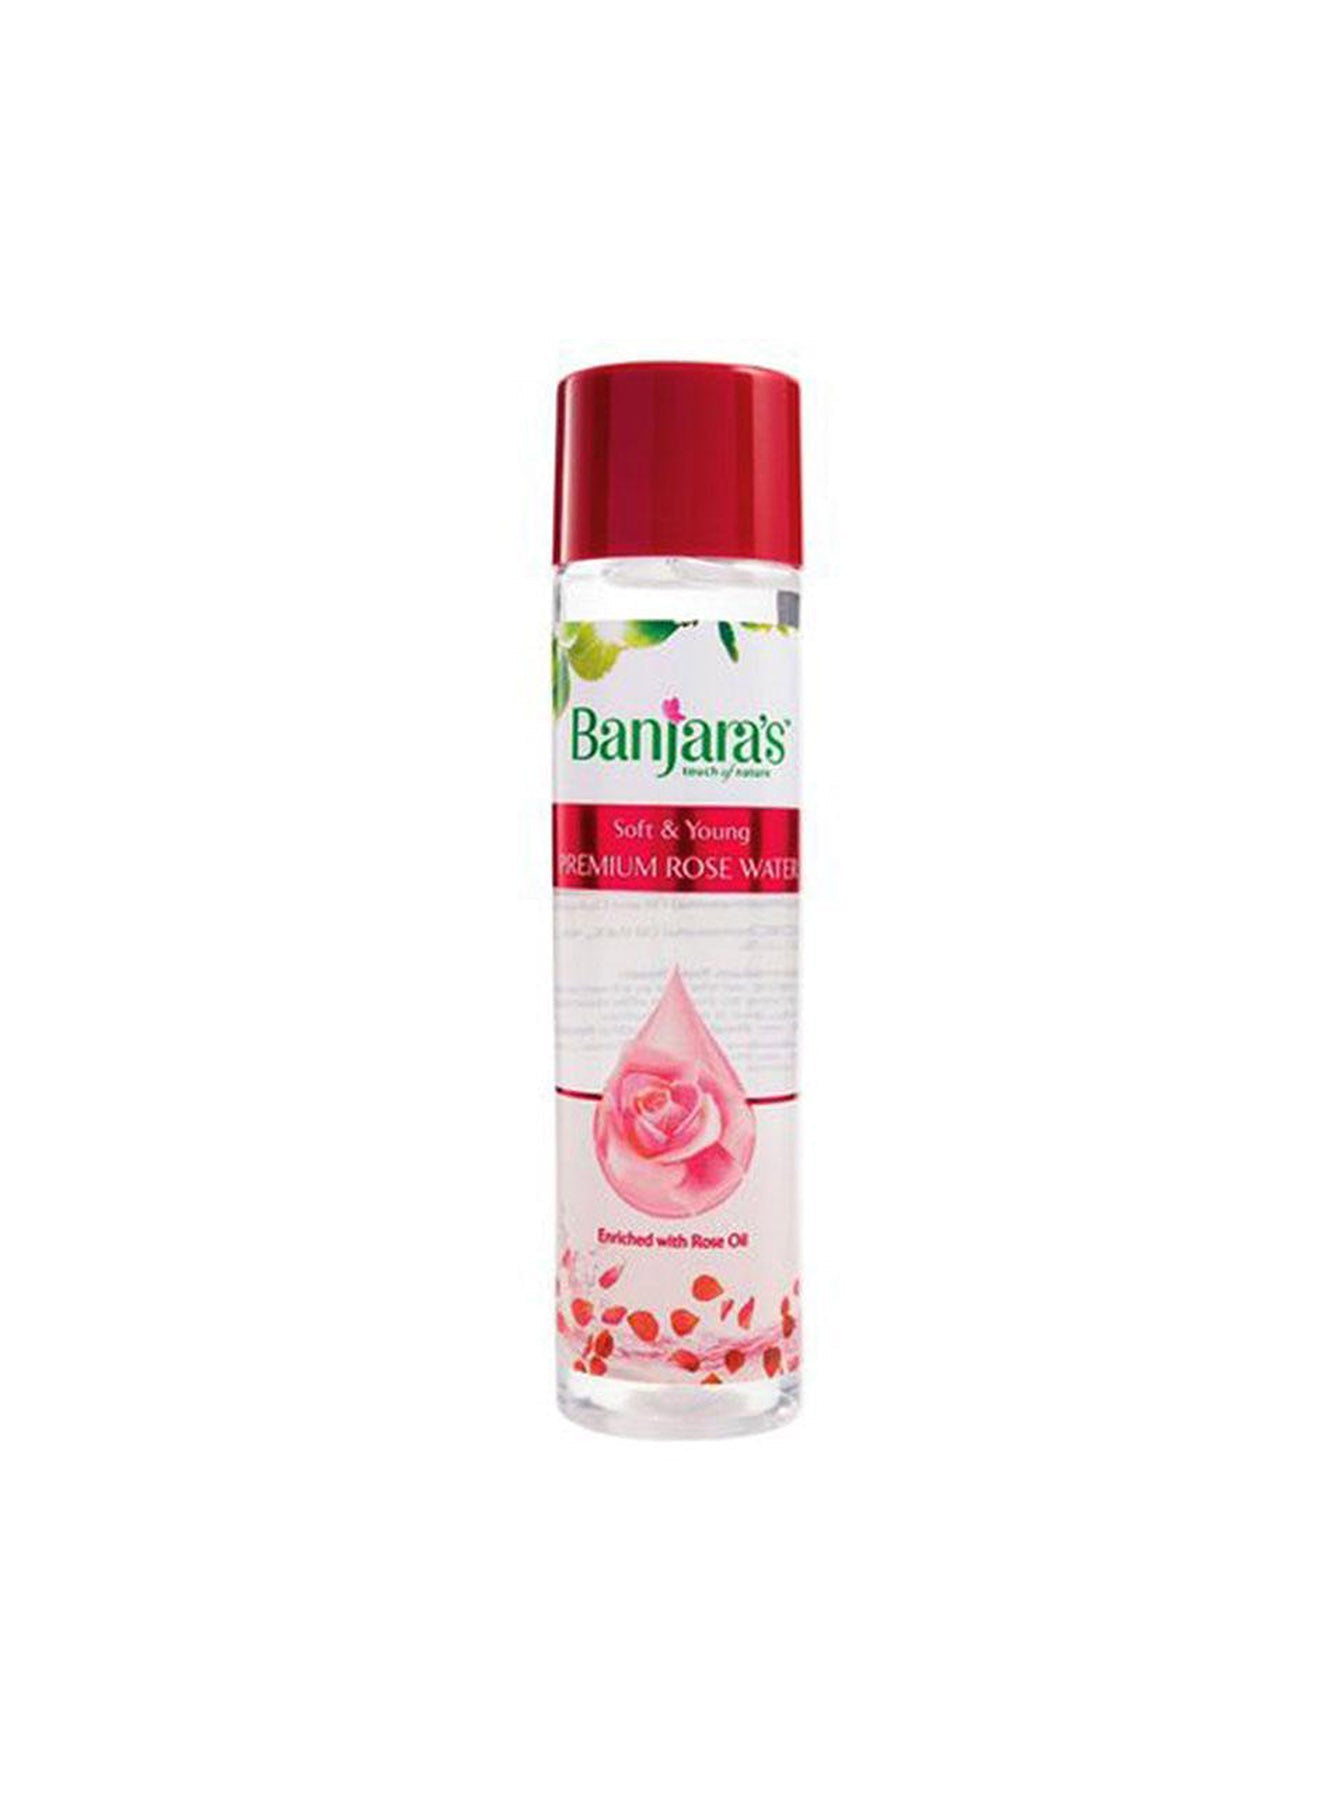 Banjaras Premium Soft and Young Rose Water 120ml Value Pack of 12 